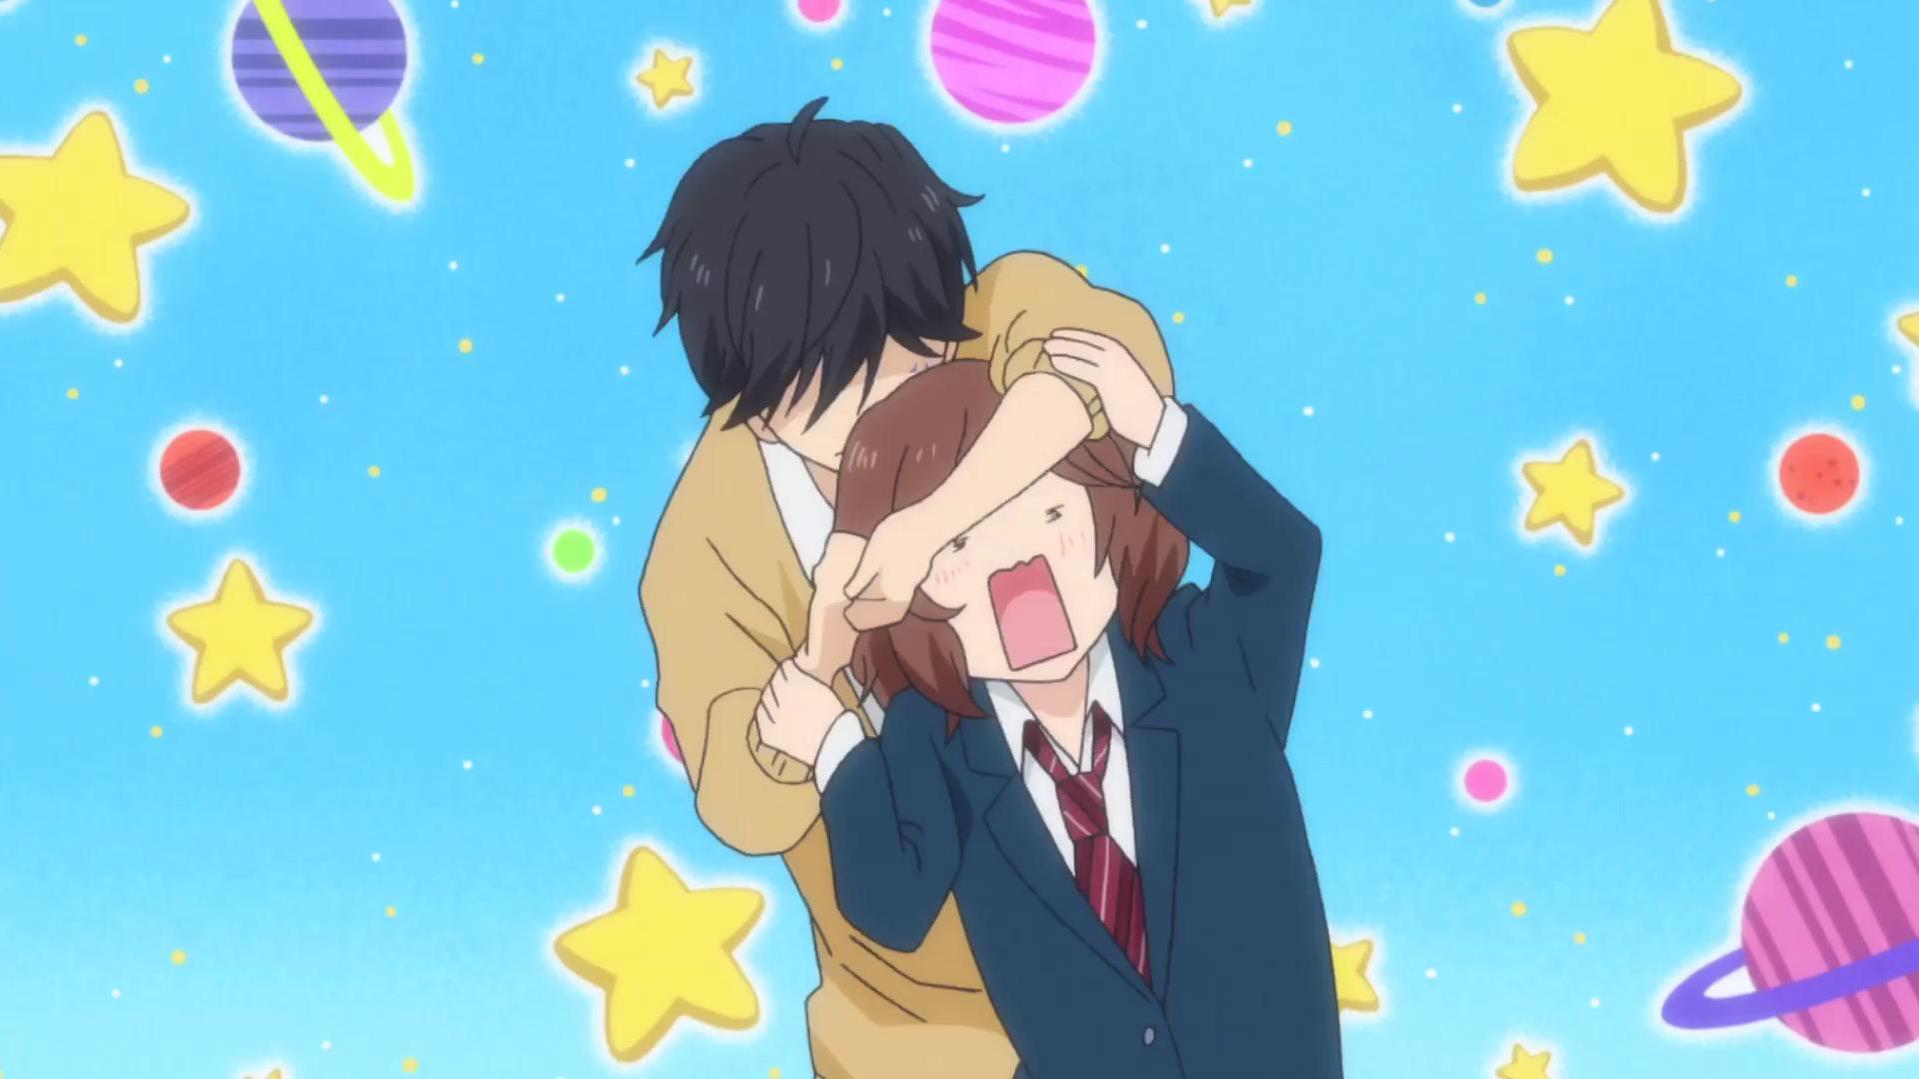 5 Most Romantic Scenes from Ao Haru Ride – just another random blog